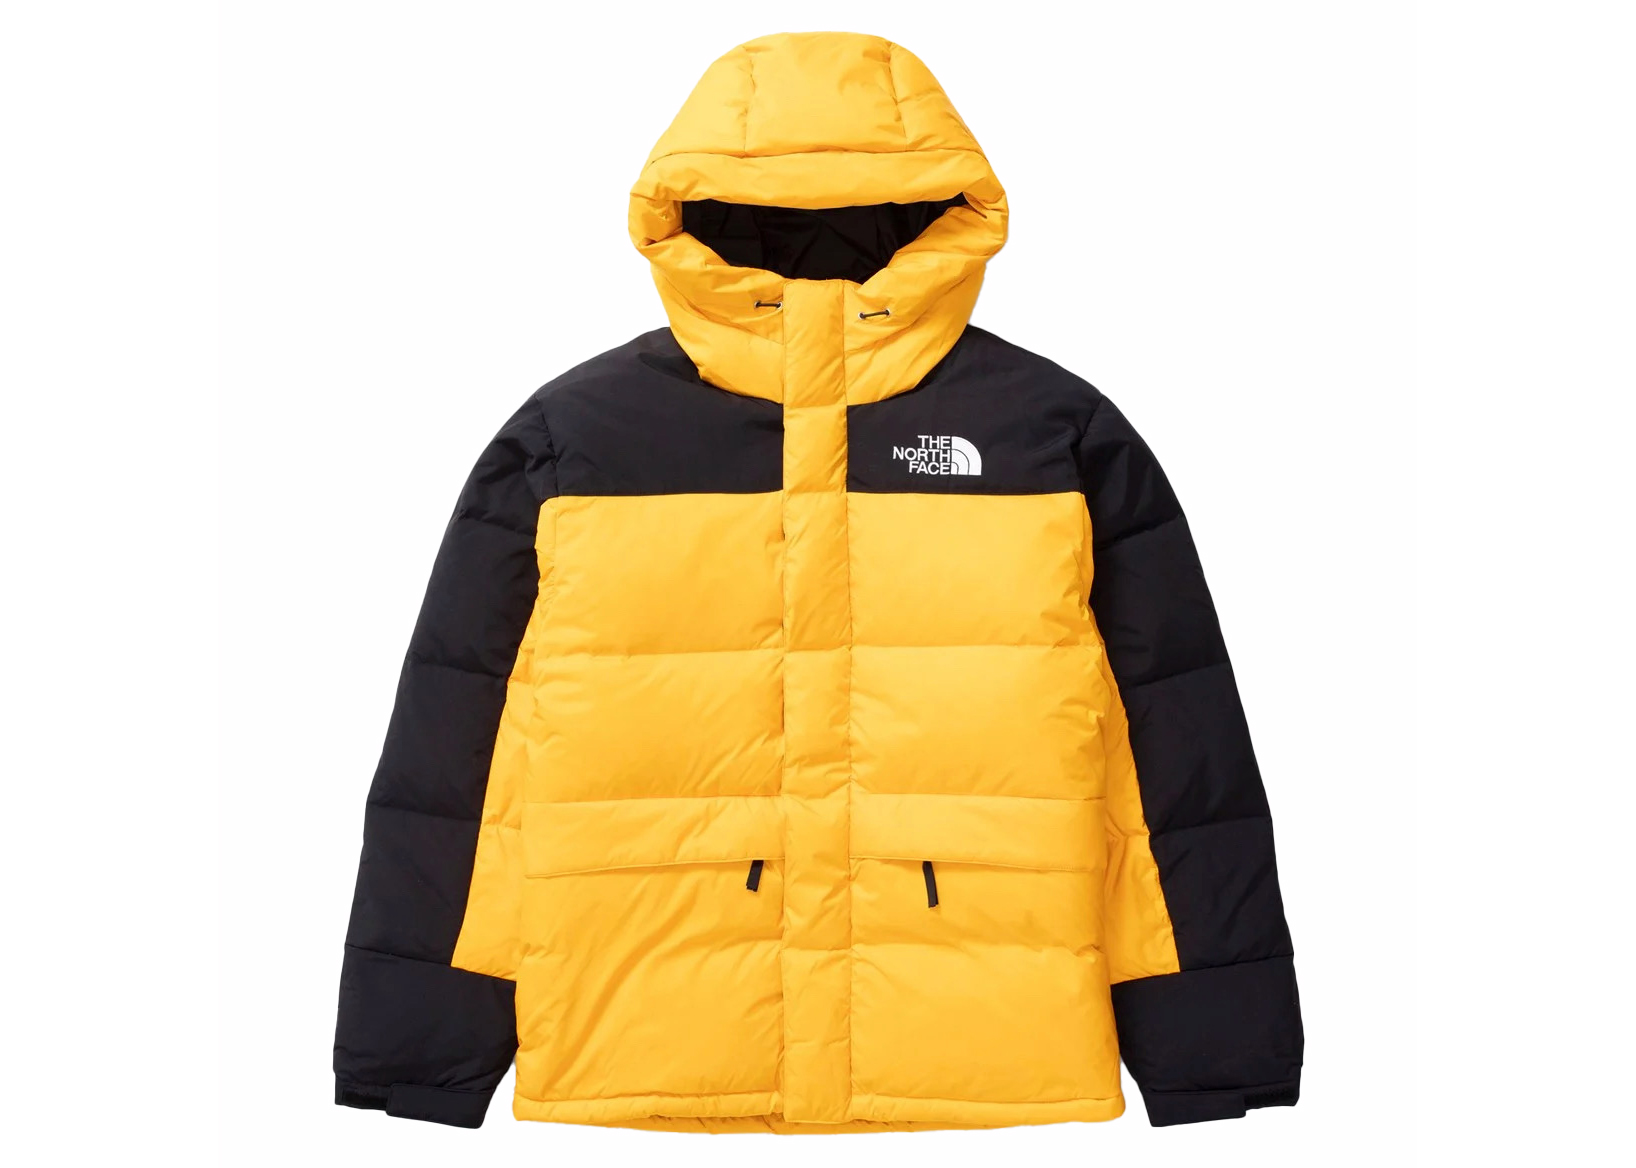 M FLARE DOWN JACKET II | The North Face | The North Face Renewed